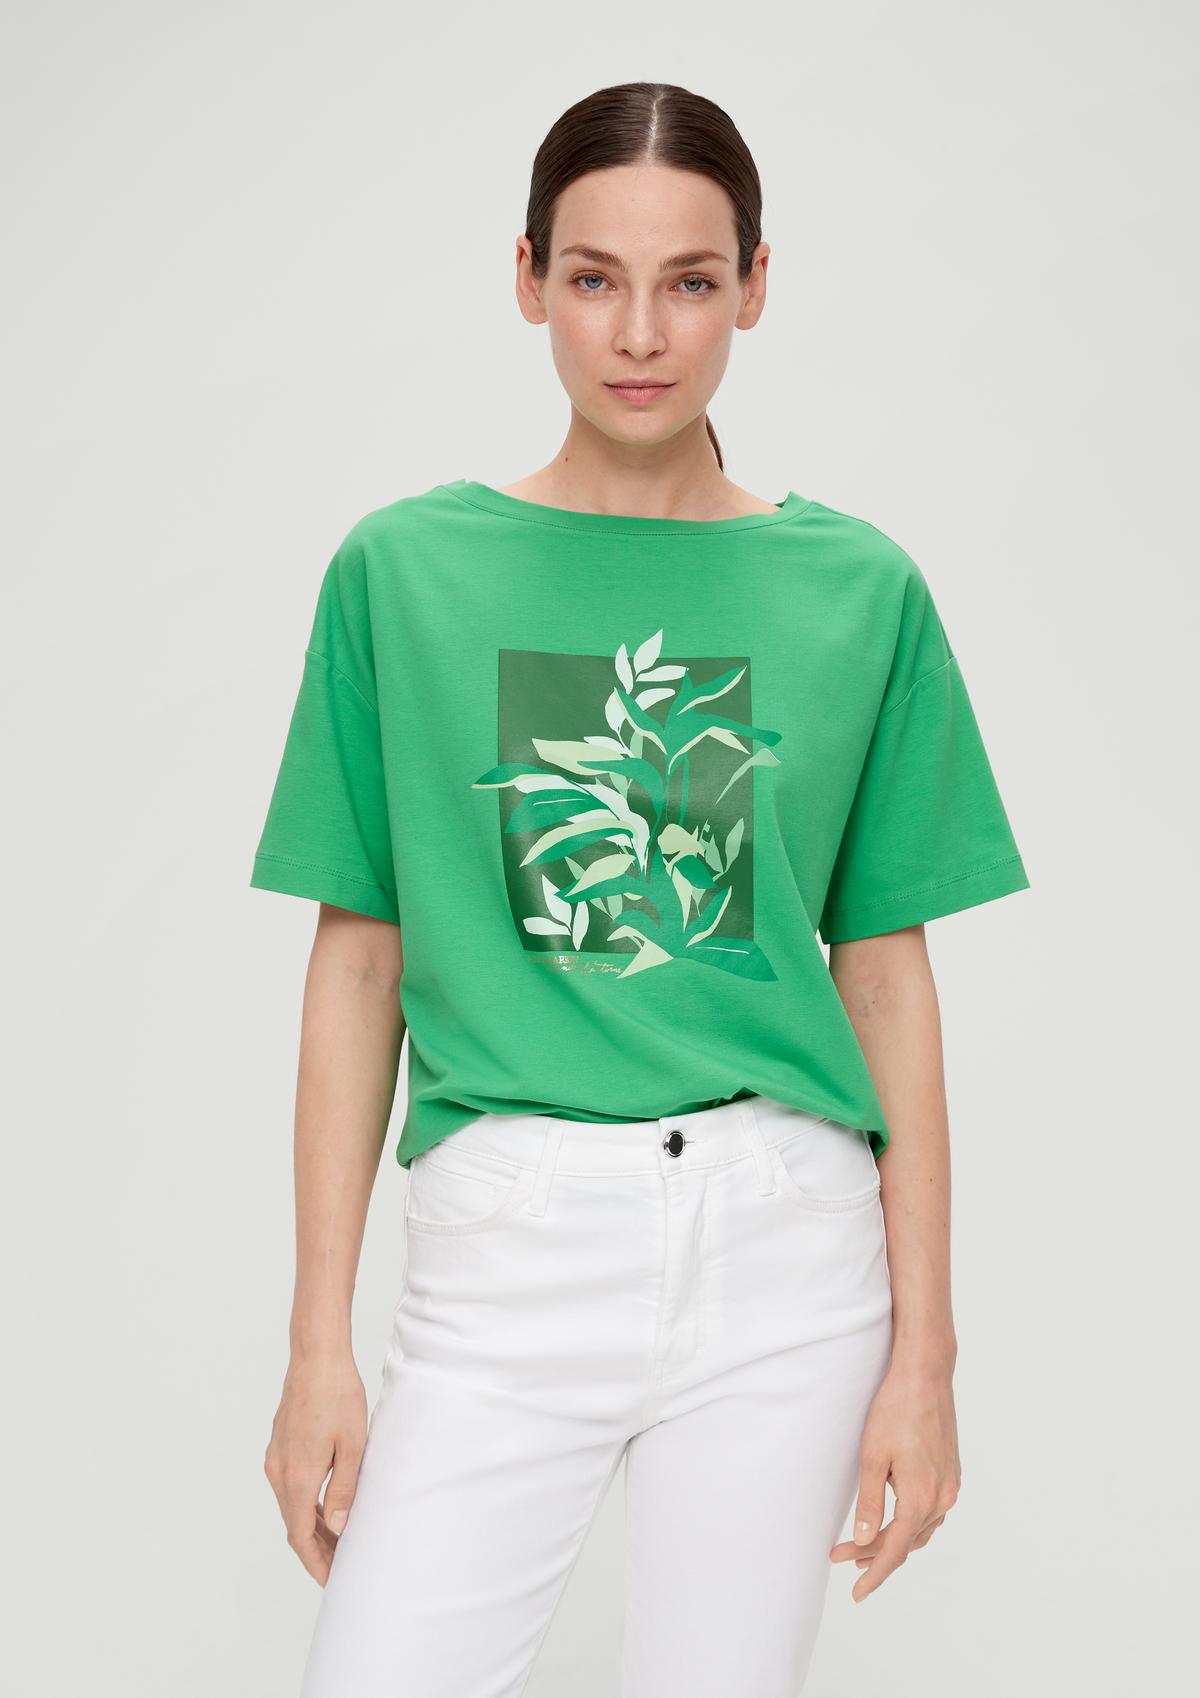 T-shirt a print front - ecru with